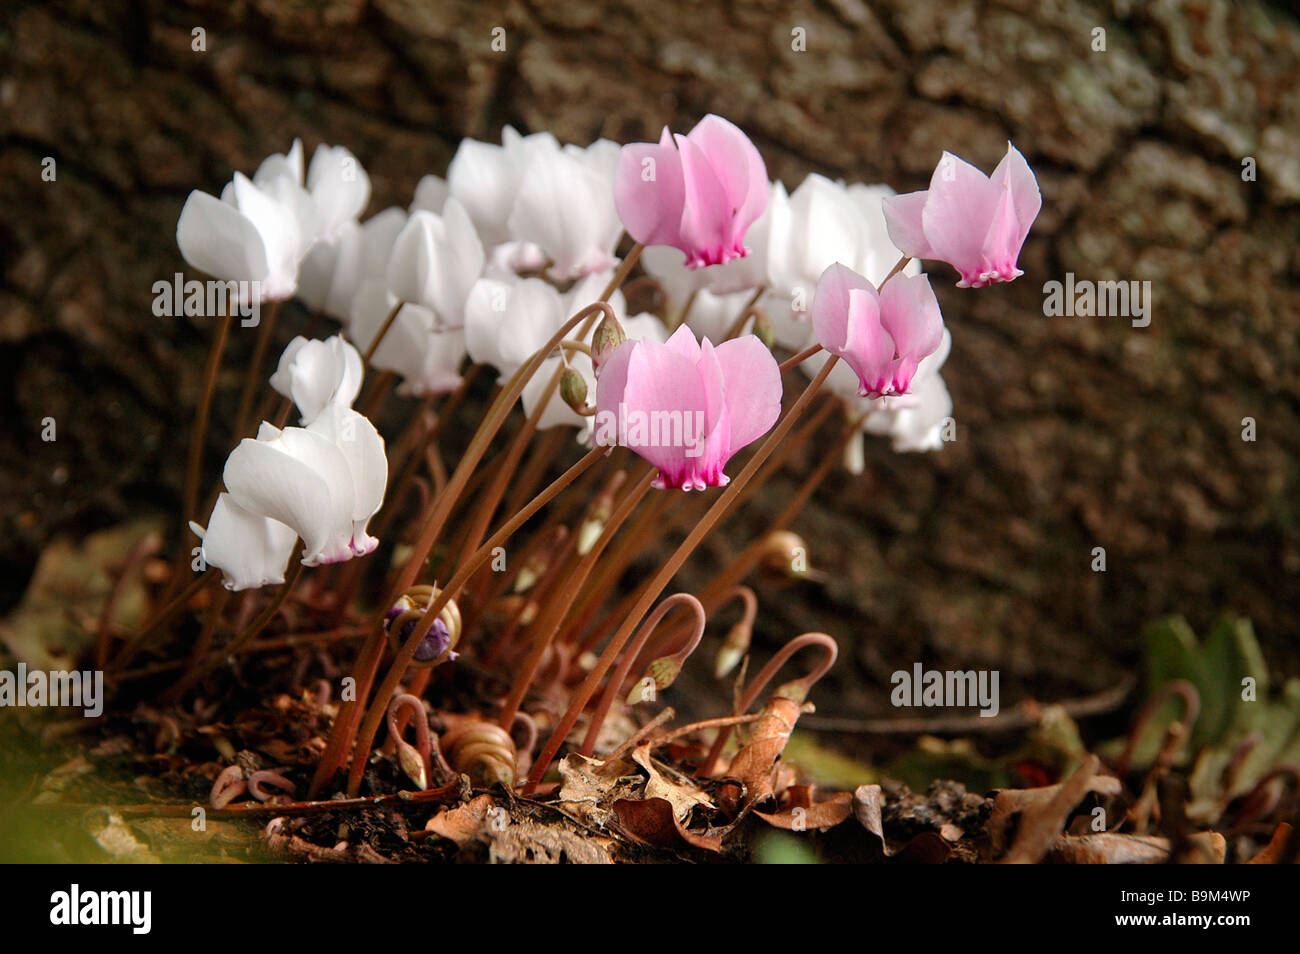 Flowering pink and white Cyclamen at the base of a tree. Stock Photo